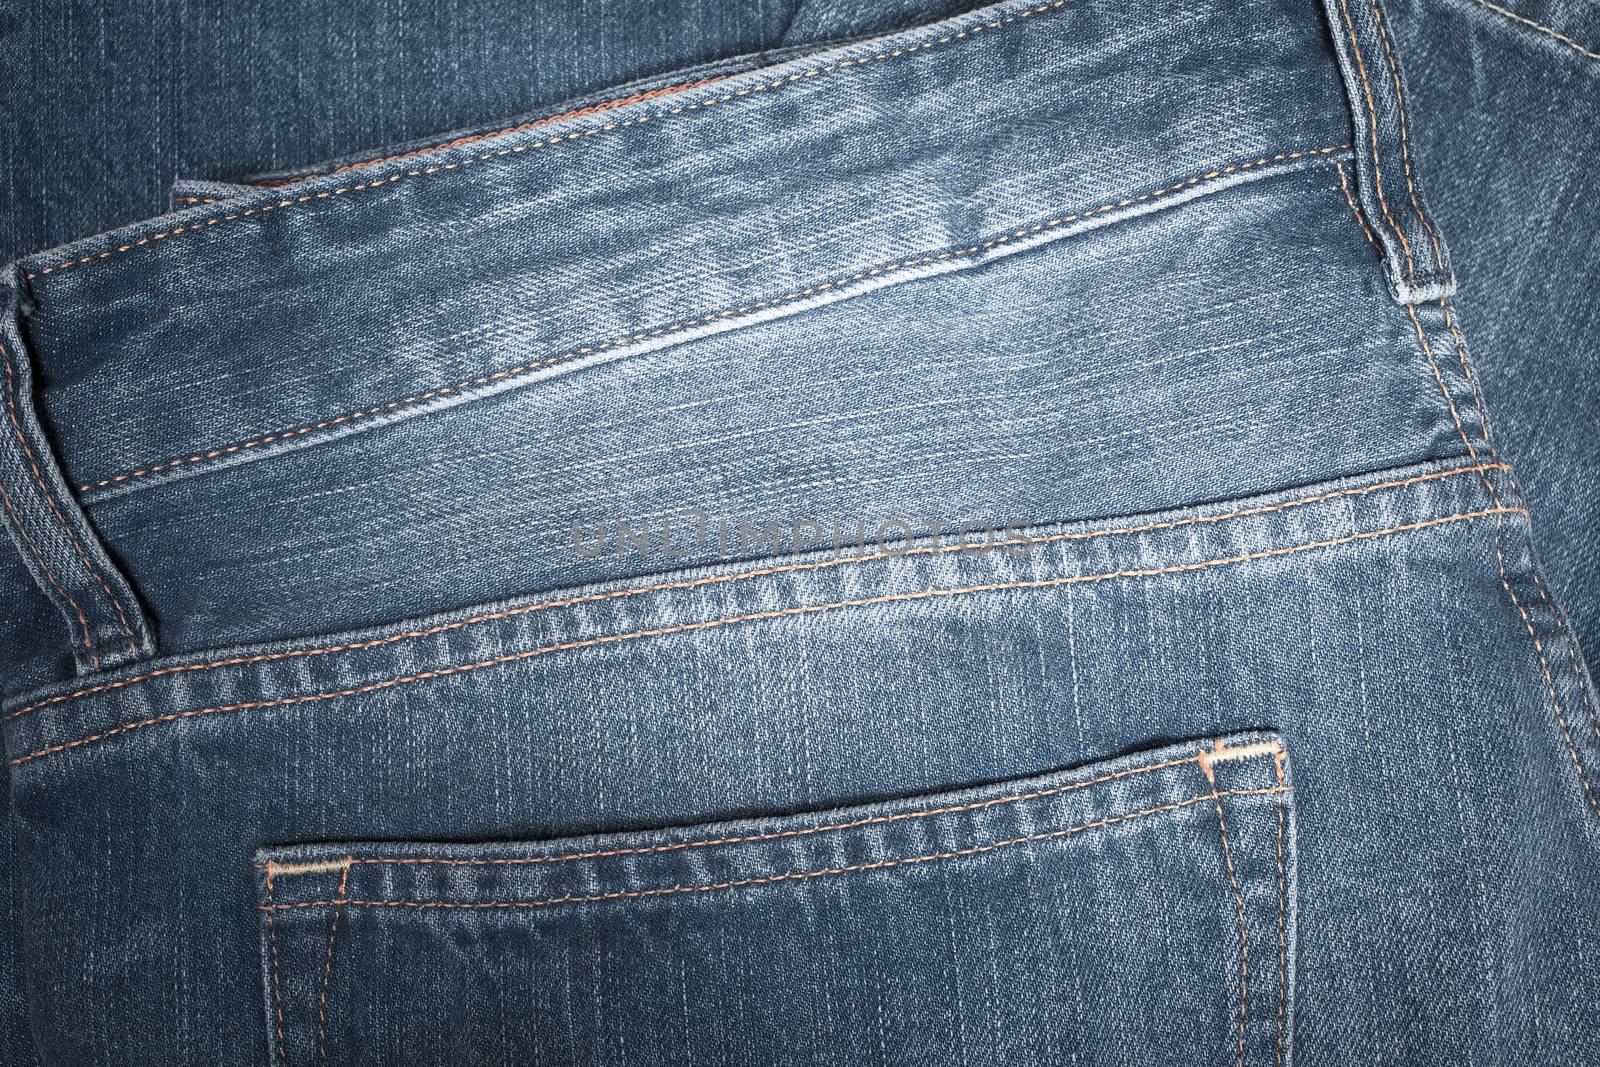 Denim texture or back of jean trouser for background